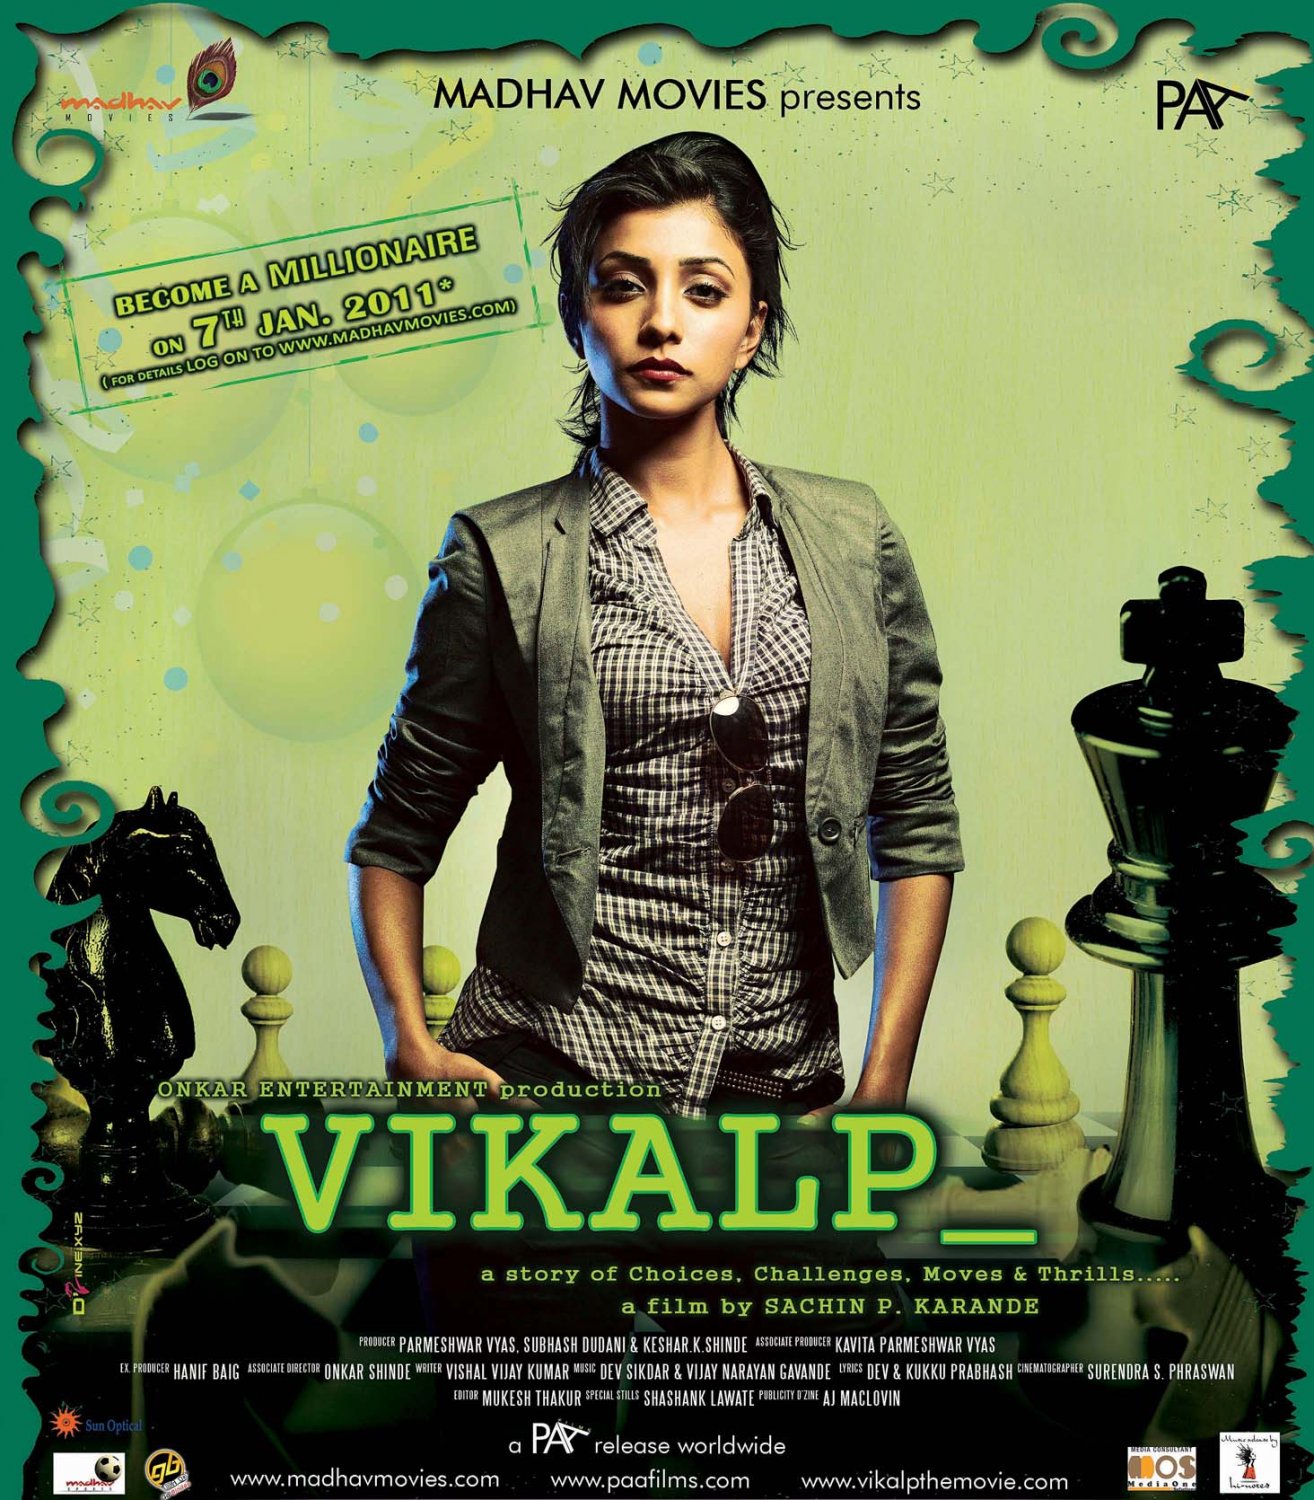 Extra Large Movie Poster Image for Vikalp (#6 of 8)